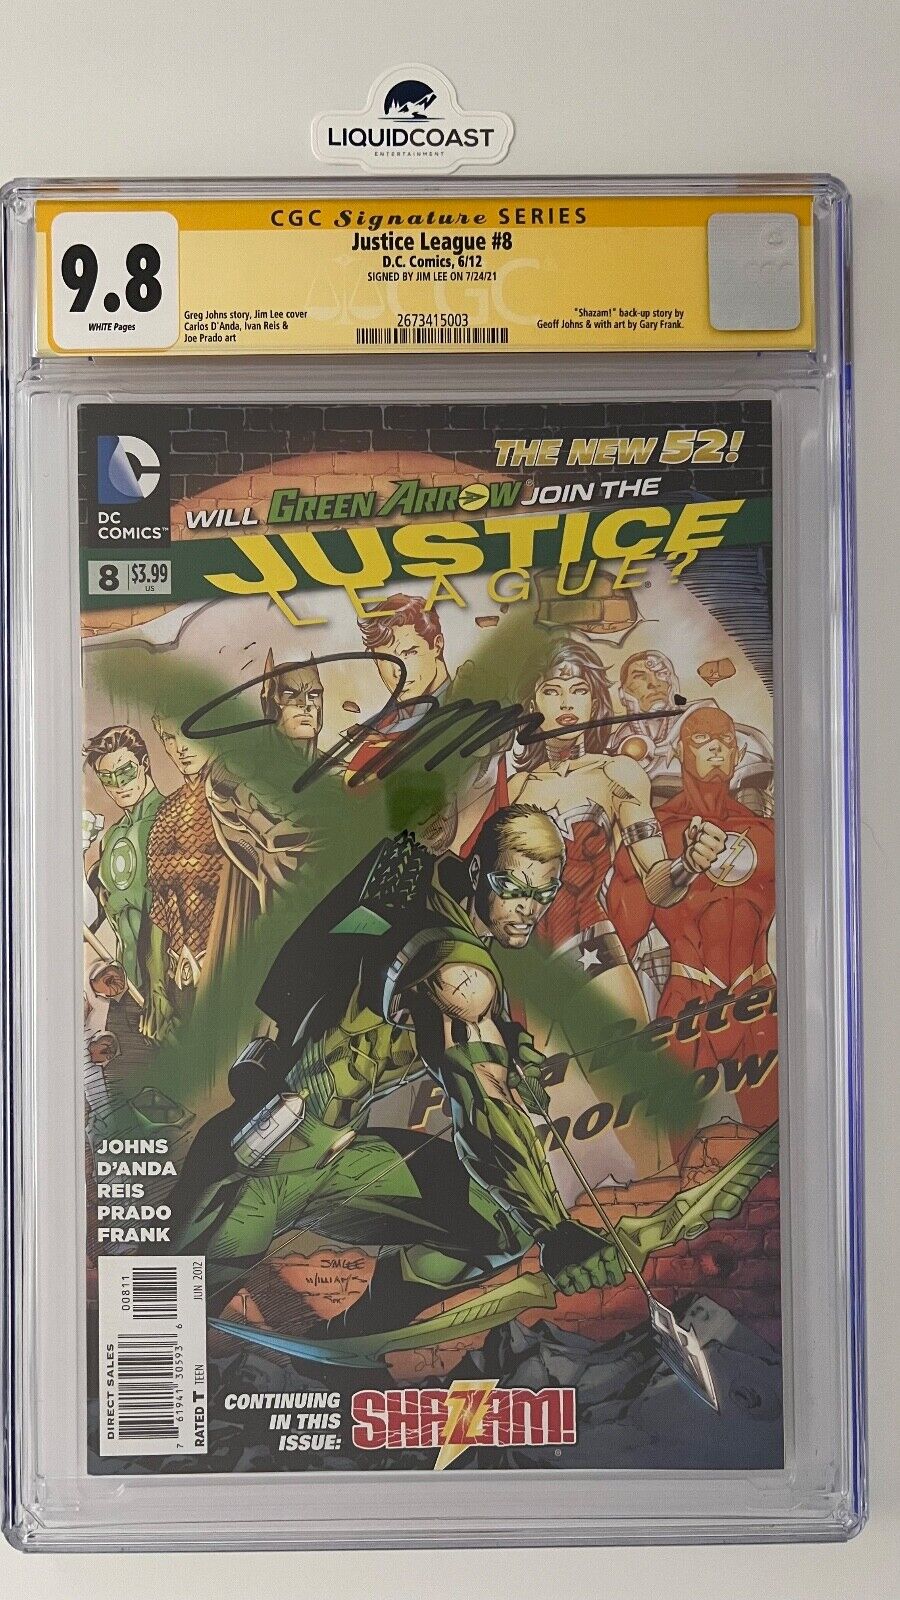 Justice League #8 SS CGC 9.8 signed by JIM LEE